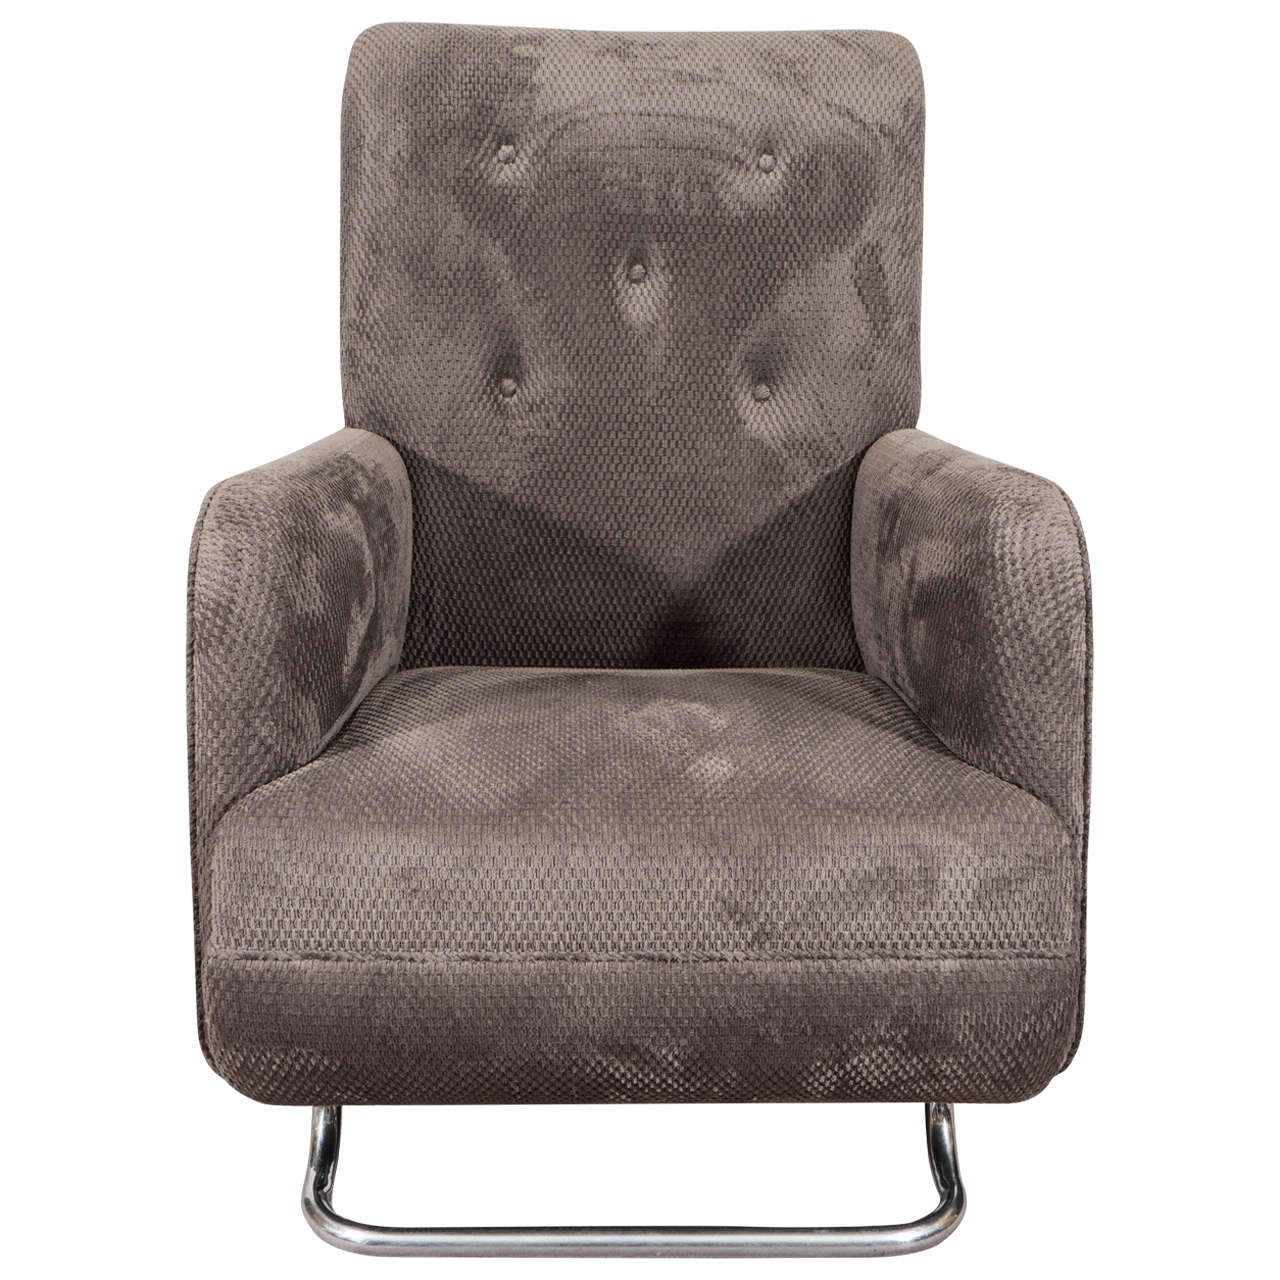  Fantastic Design Kem Weber High Back armchair with tubular chrome base in Luxurious Tufted Gray Patterned Fabric.Very Rare and Unusual Design with a lot of Angular Action.

Kem Weber was born Karl Emanuel Martin Weber in Berlin in 1889. He